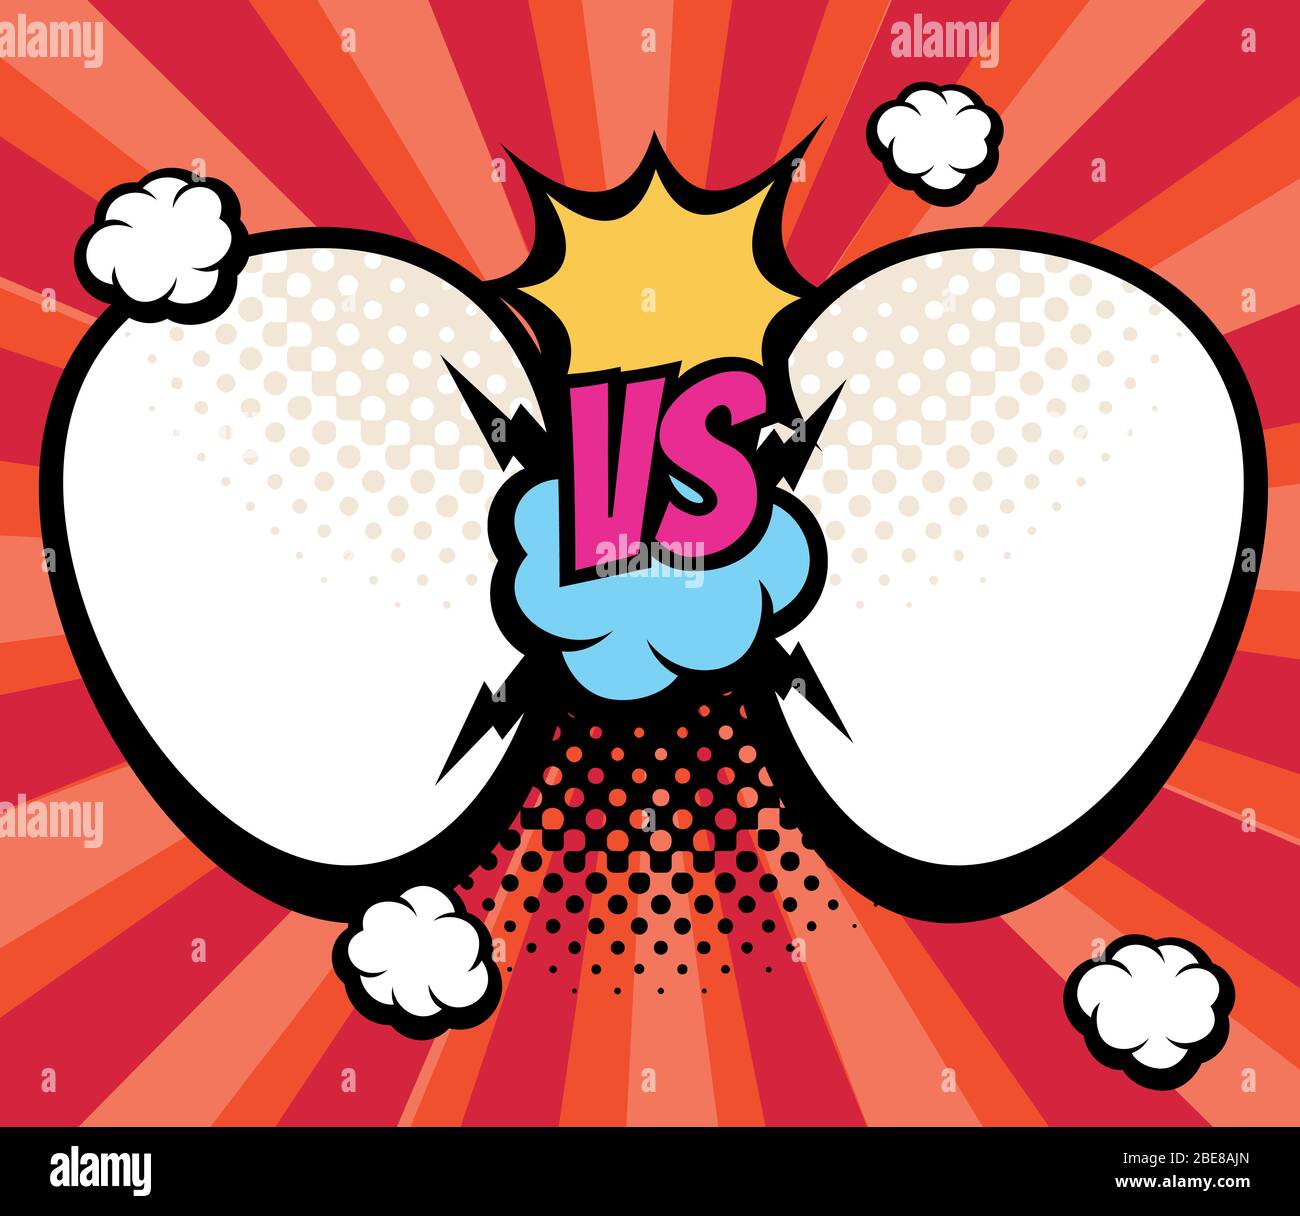 Slag versus, vs battle background with empty frames for names vector illustration. Vs championship and sport challenge, conflict and compare Stock Vector